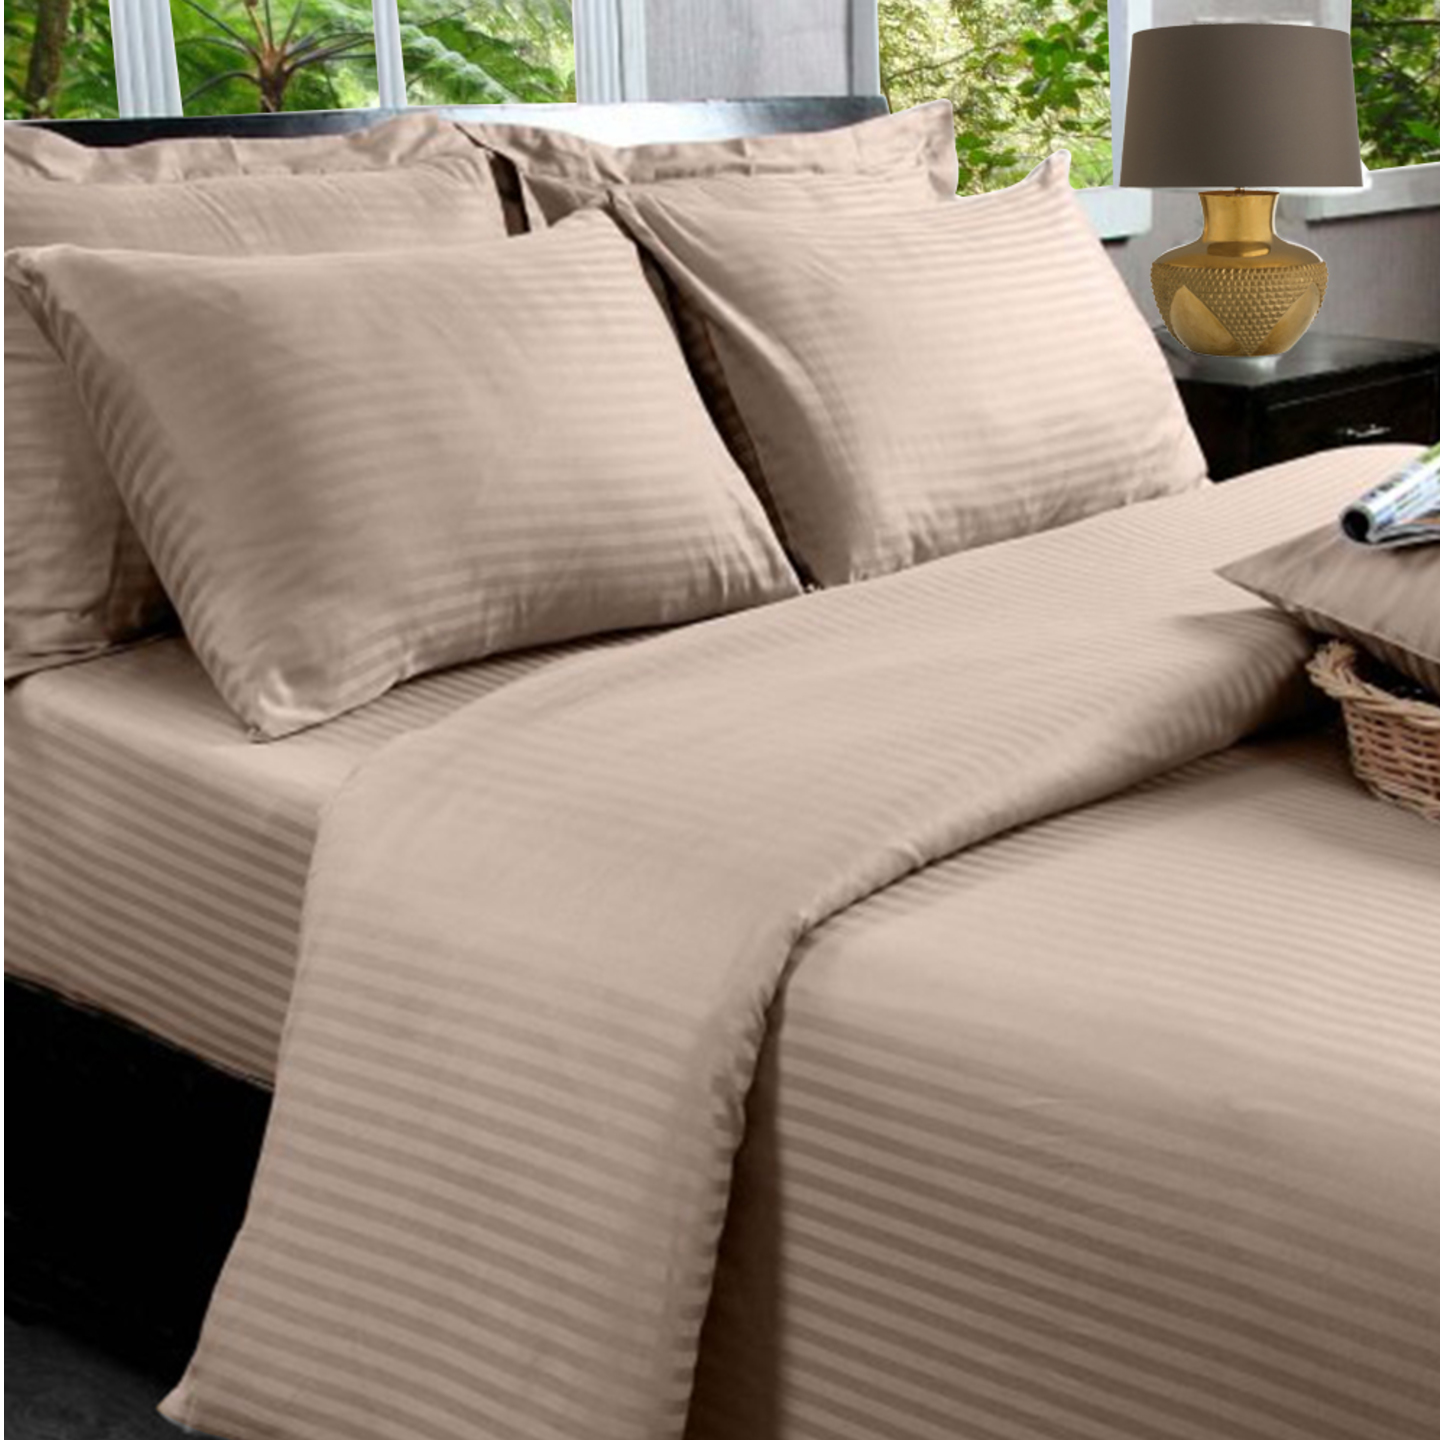 Desert Sand Beige - 100 % Cotton -  330 Thread Count - Sateen Fitted Sheet - King Size